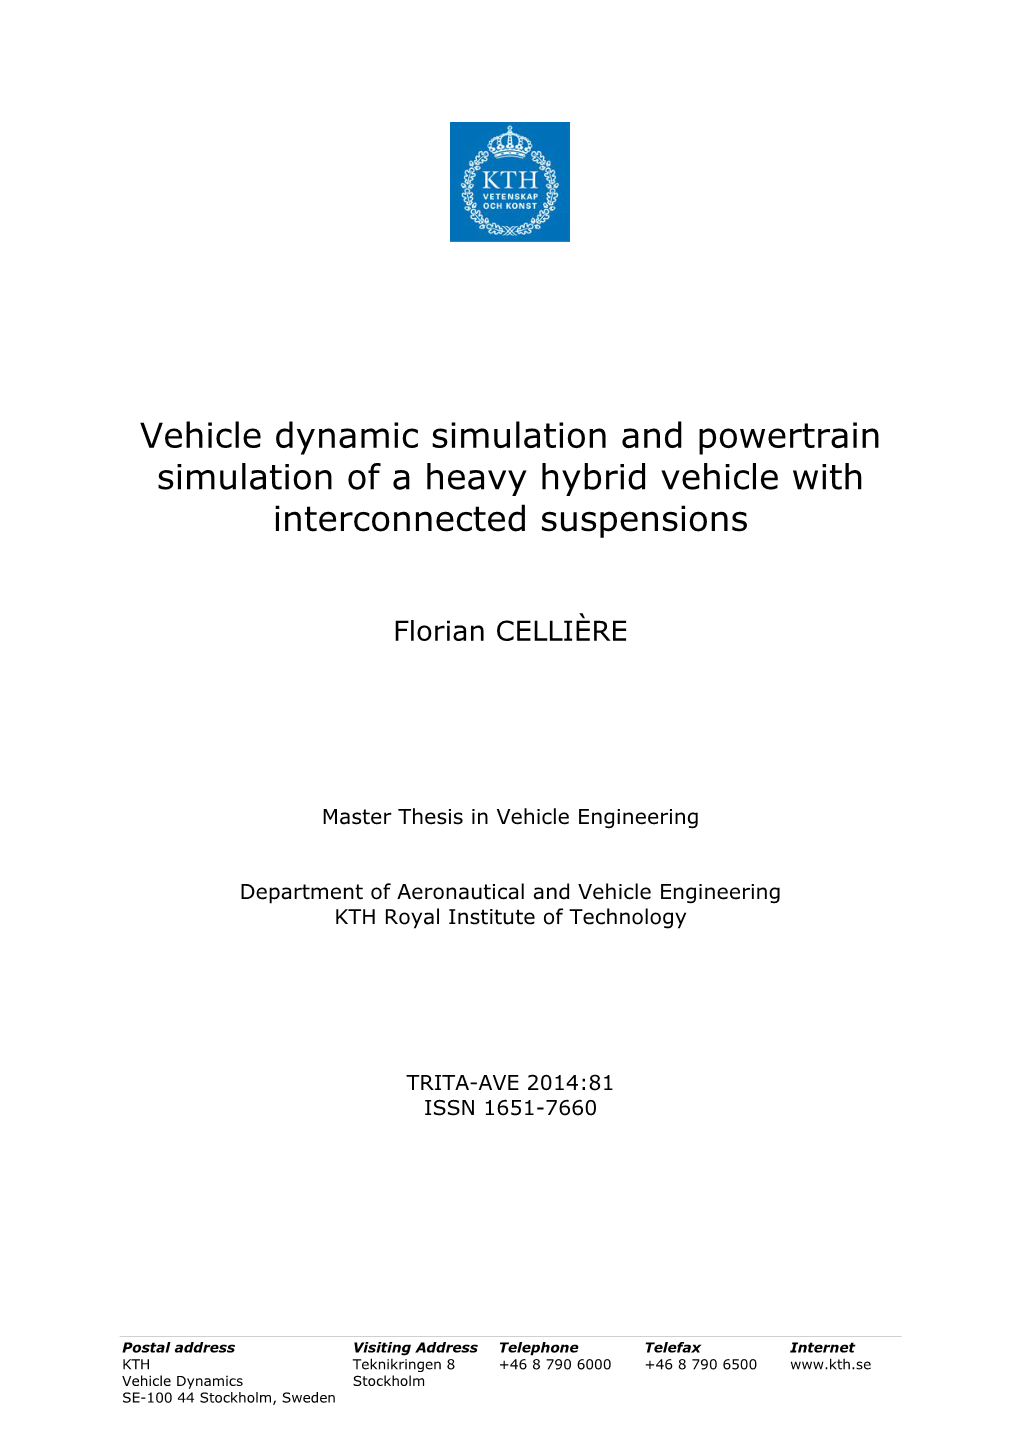 Vehicle Dynamic Simulation and Powertrain Simulation of a Heavy Hybrid Vehicle with Interconnected Suspensions